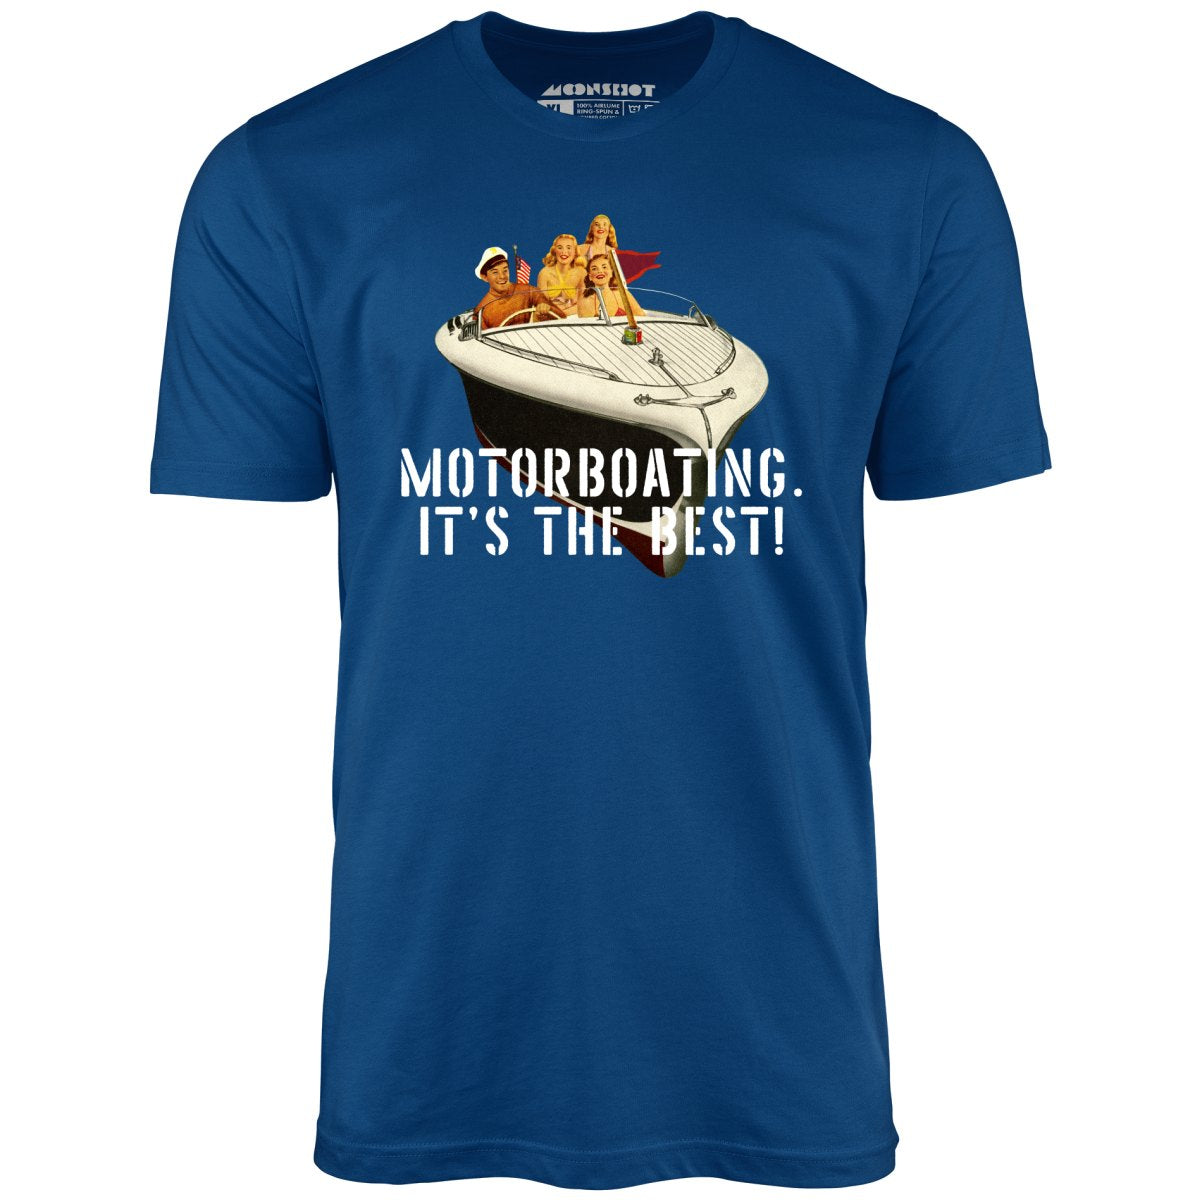 Motorboating It's The Best - Unisex T-Shirt